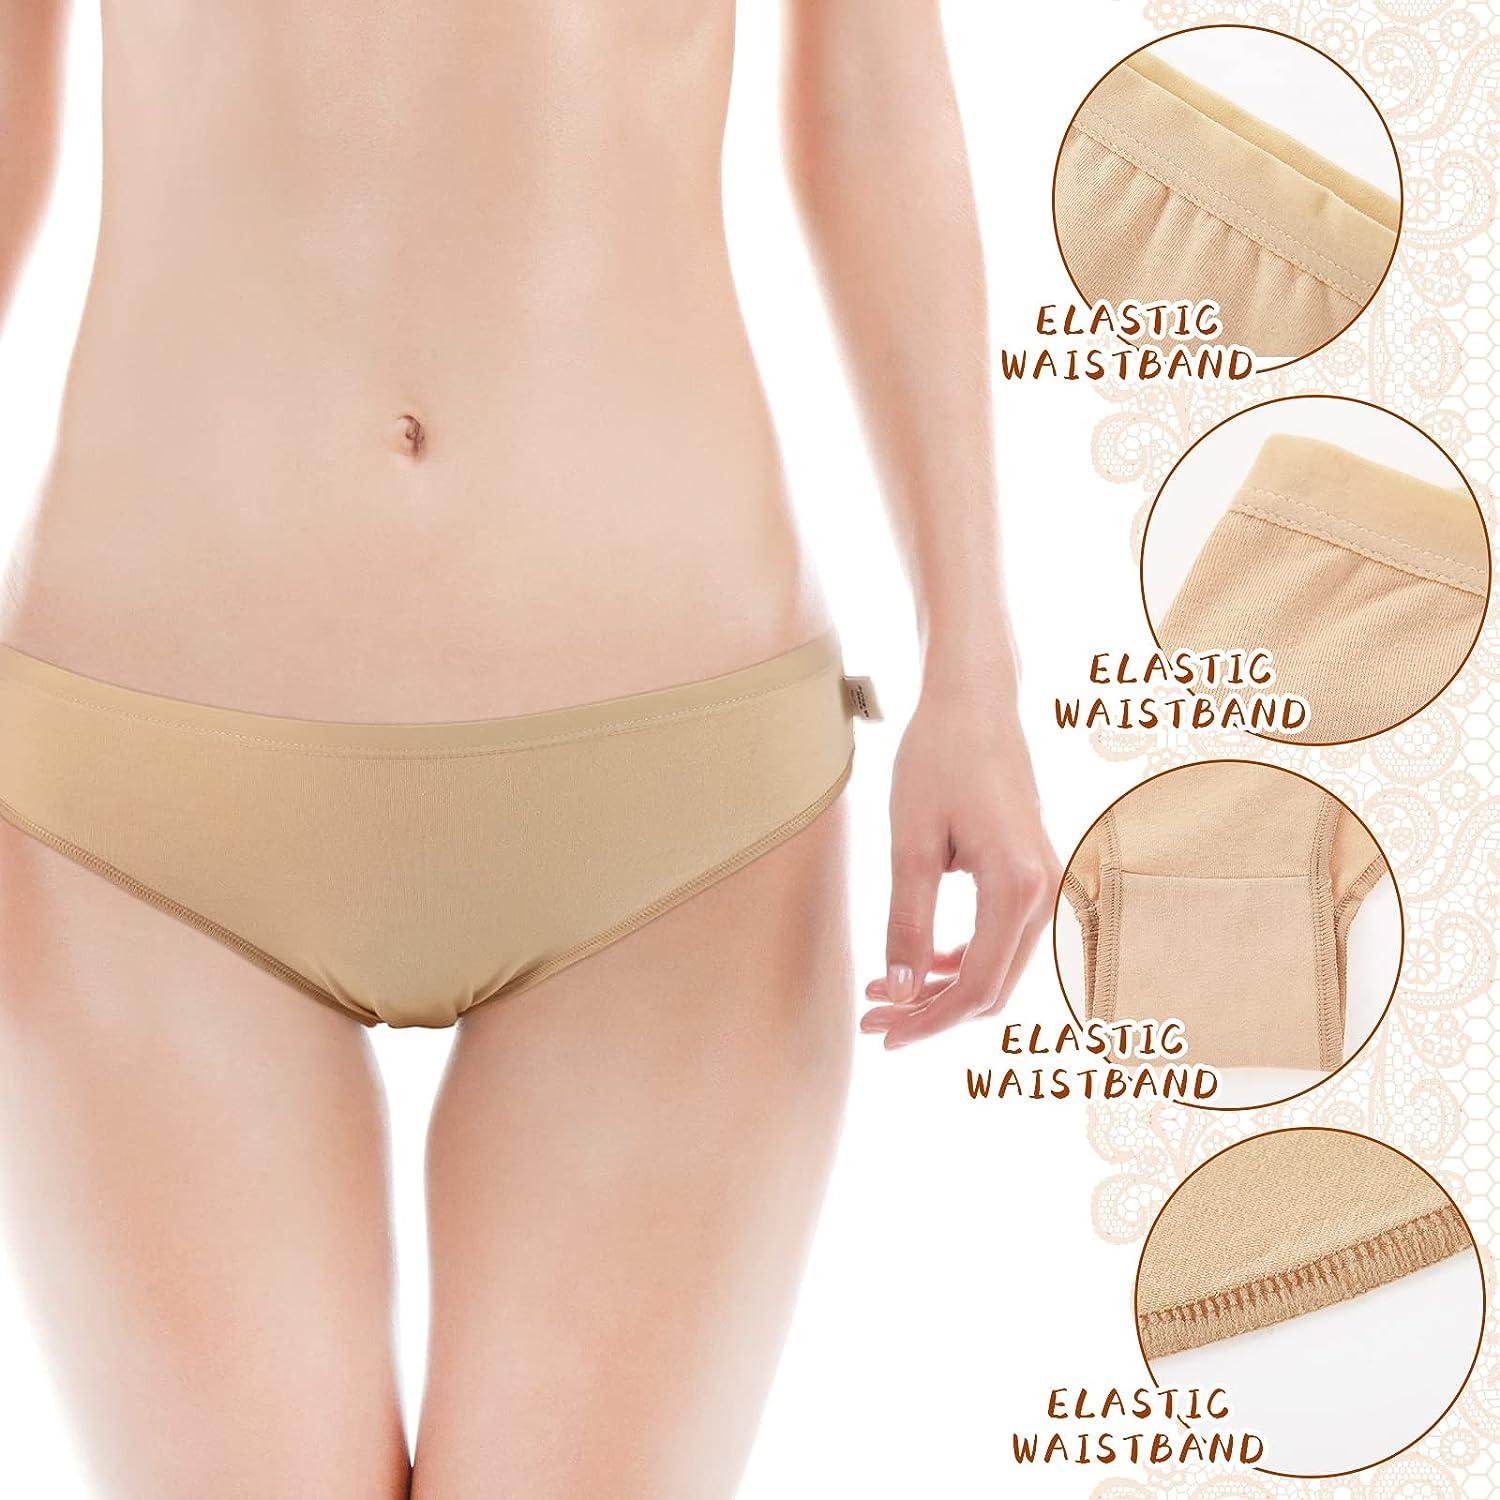 100% Cotton Underwear Panties For Women Middle Aged Elderly Mid-Waisted  Ladies Briefs Panty Sleep Underpants Lingerie